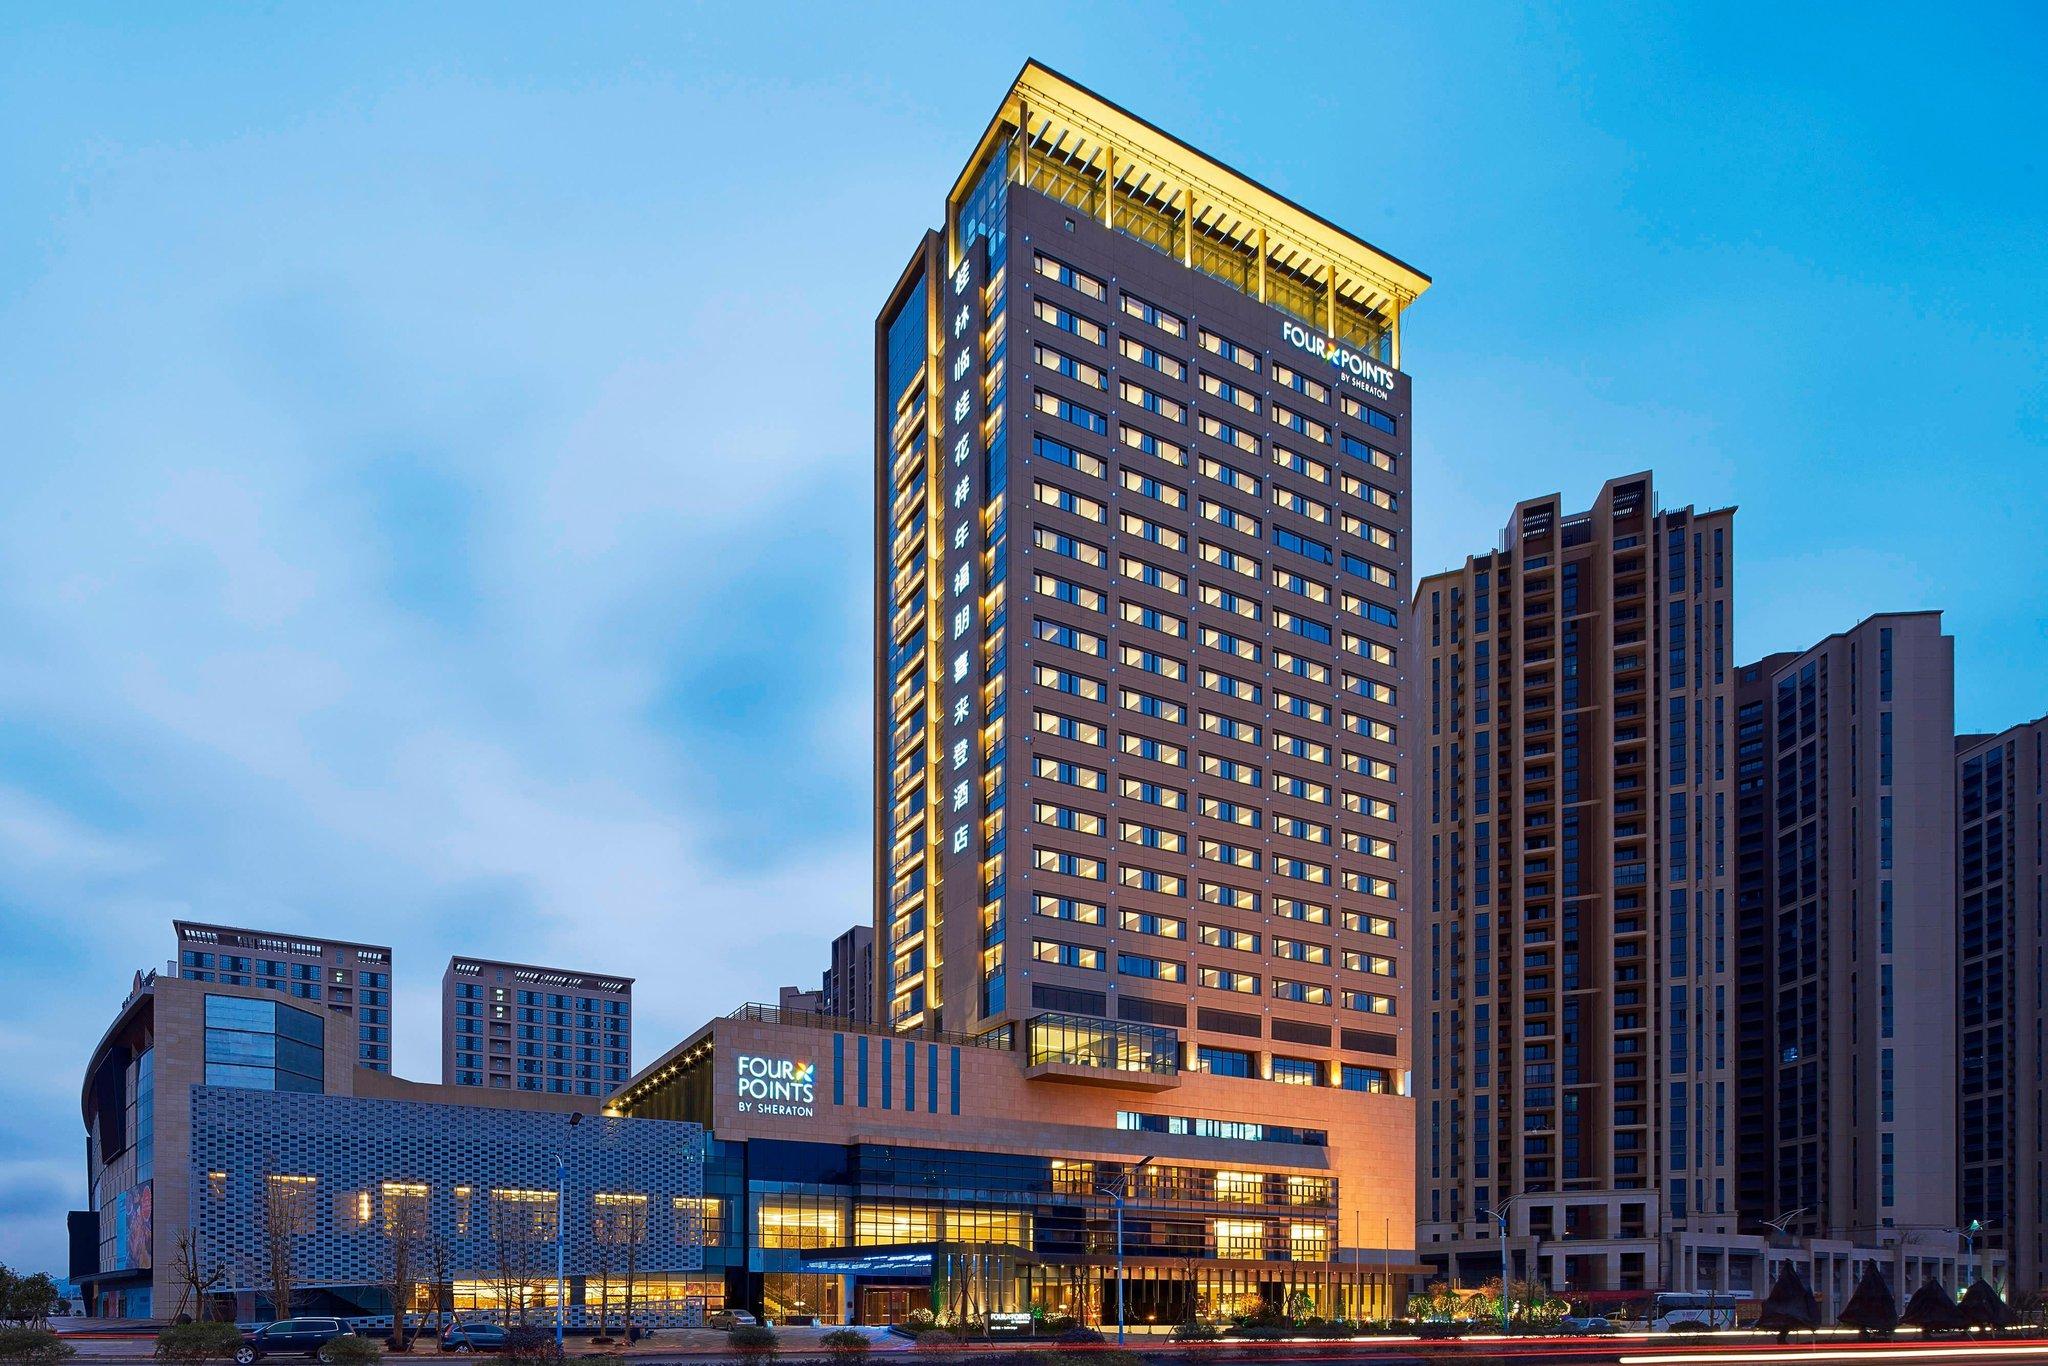 Four Points by Sheraton Guilin, Lingui in Guilin, CN